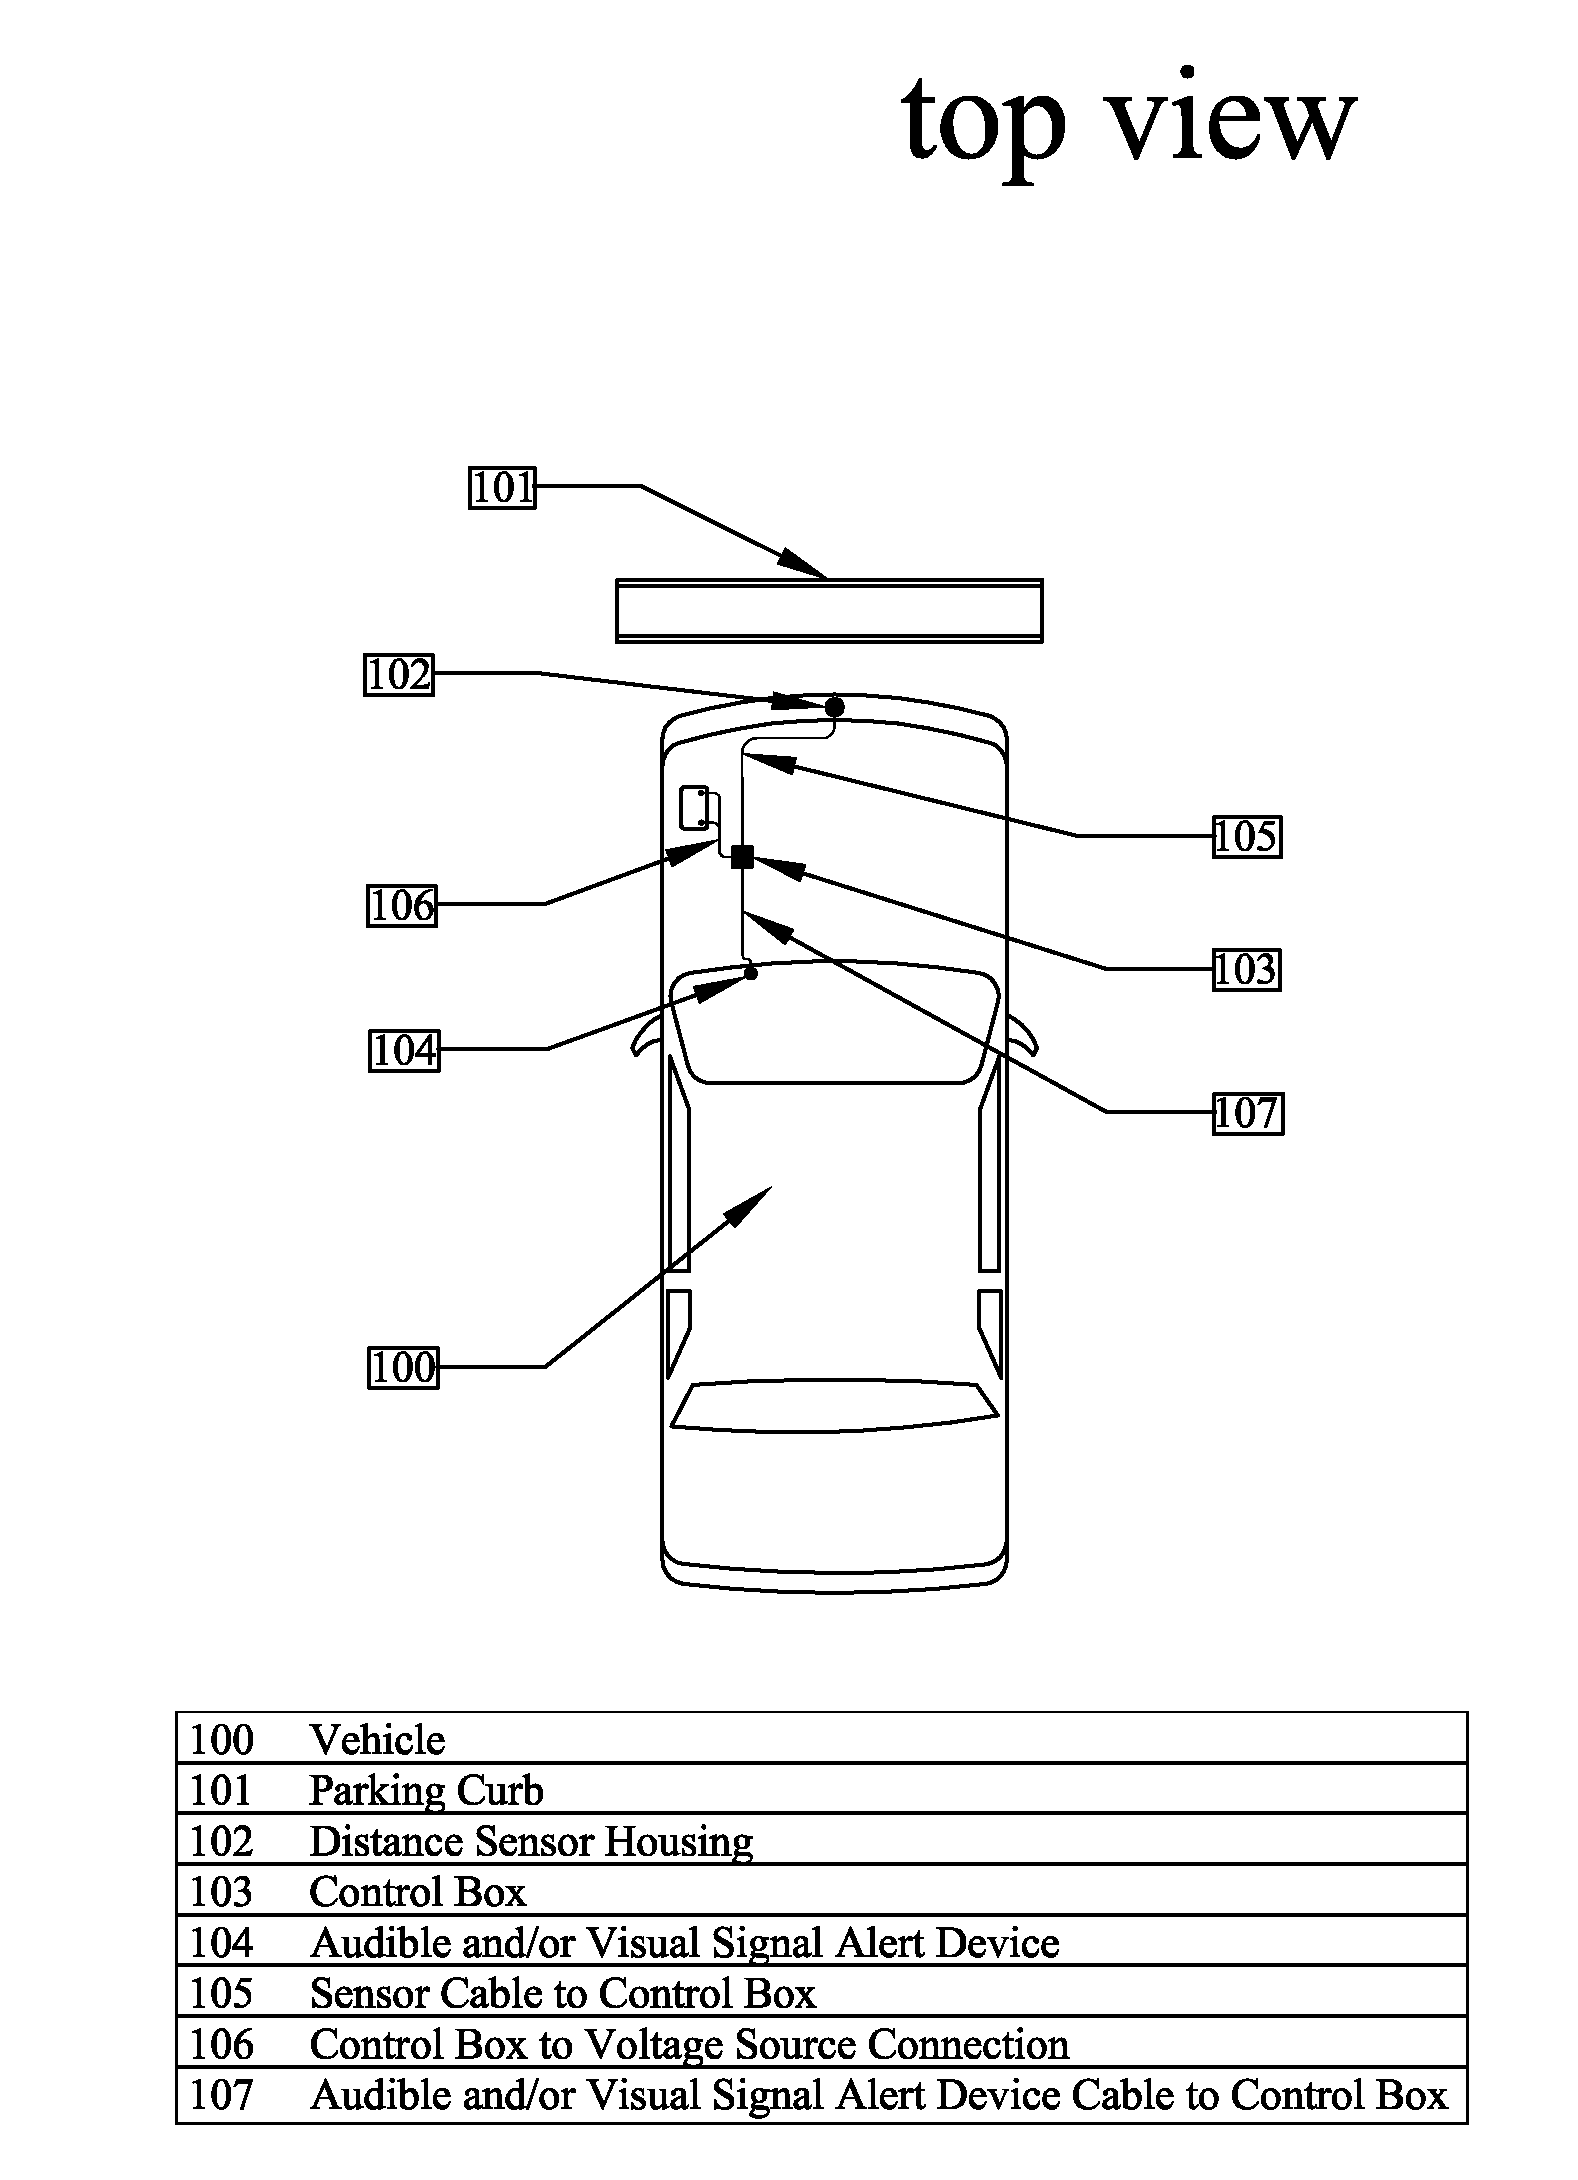 Curb detection device for motor vehicles